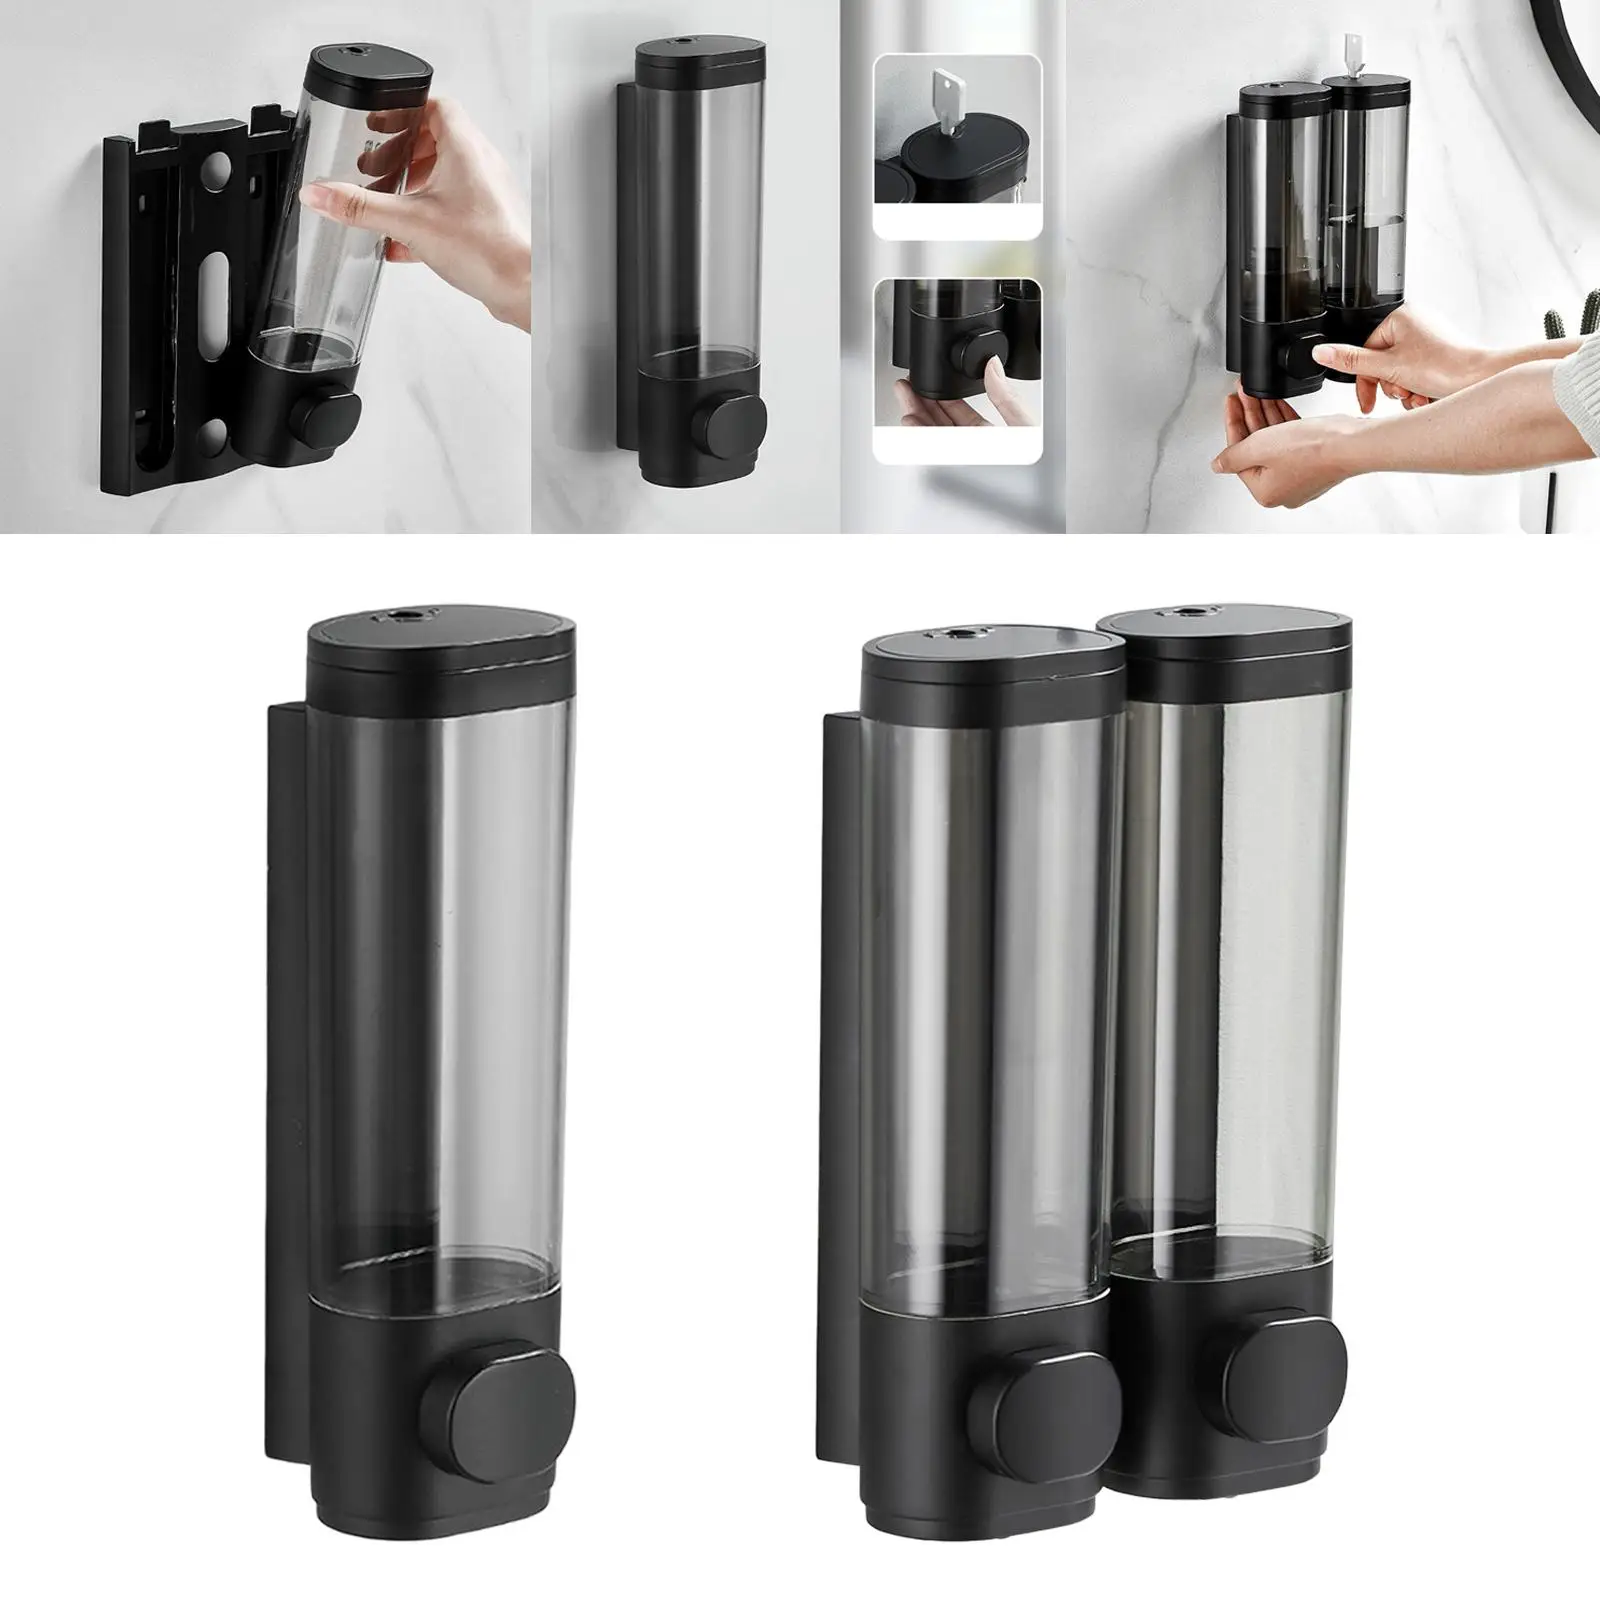 Manual Soap Dispenser 350ml Large Capacity Shampoo Container Shower Dispensers for Office Bathroom Kitchen Restaurant Hotel